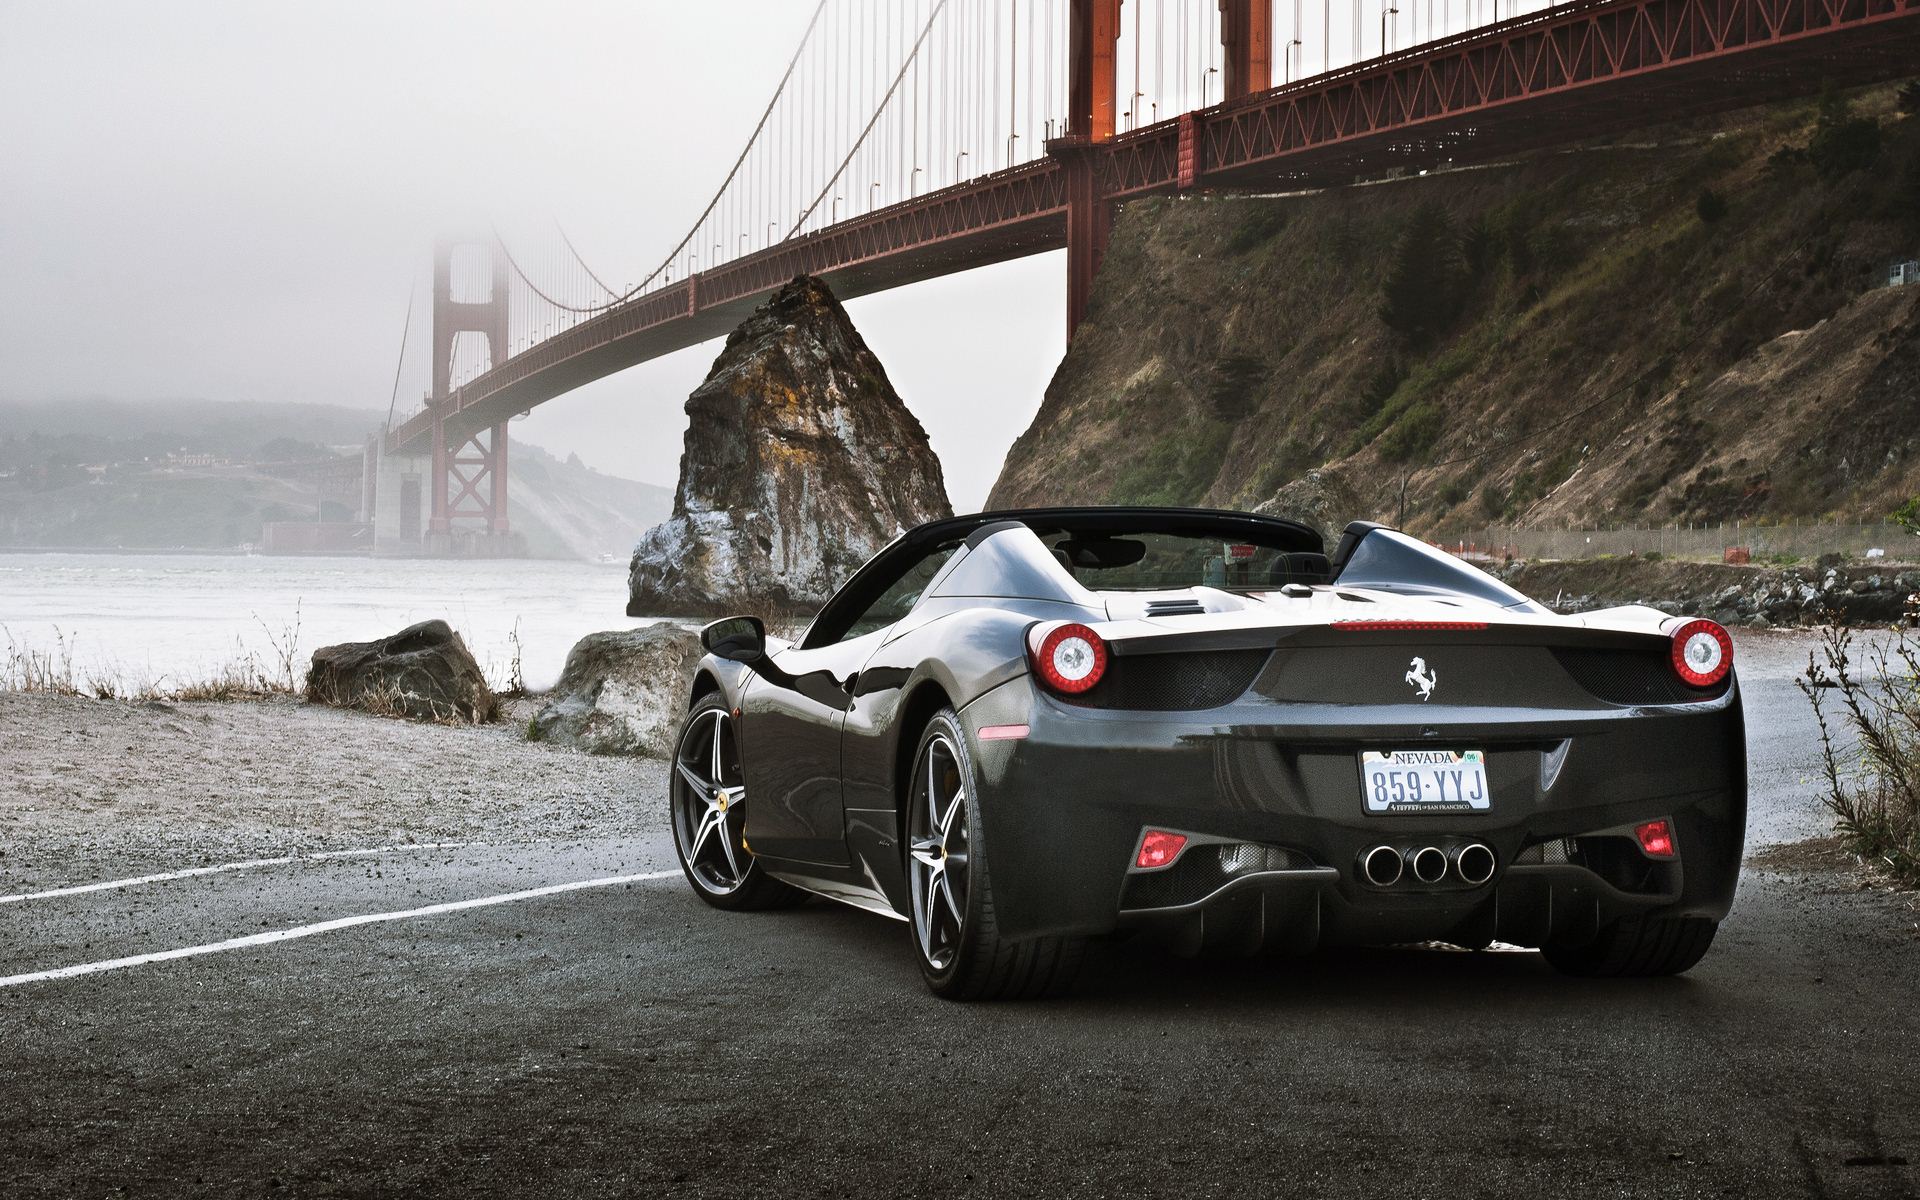 Ferrari Spider Blacked Out HD Wallpaper Background Image